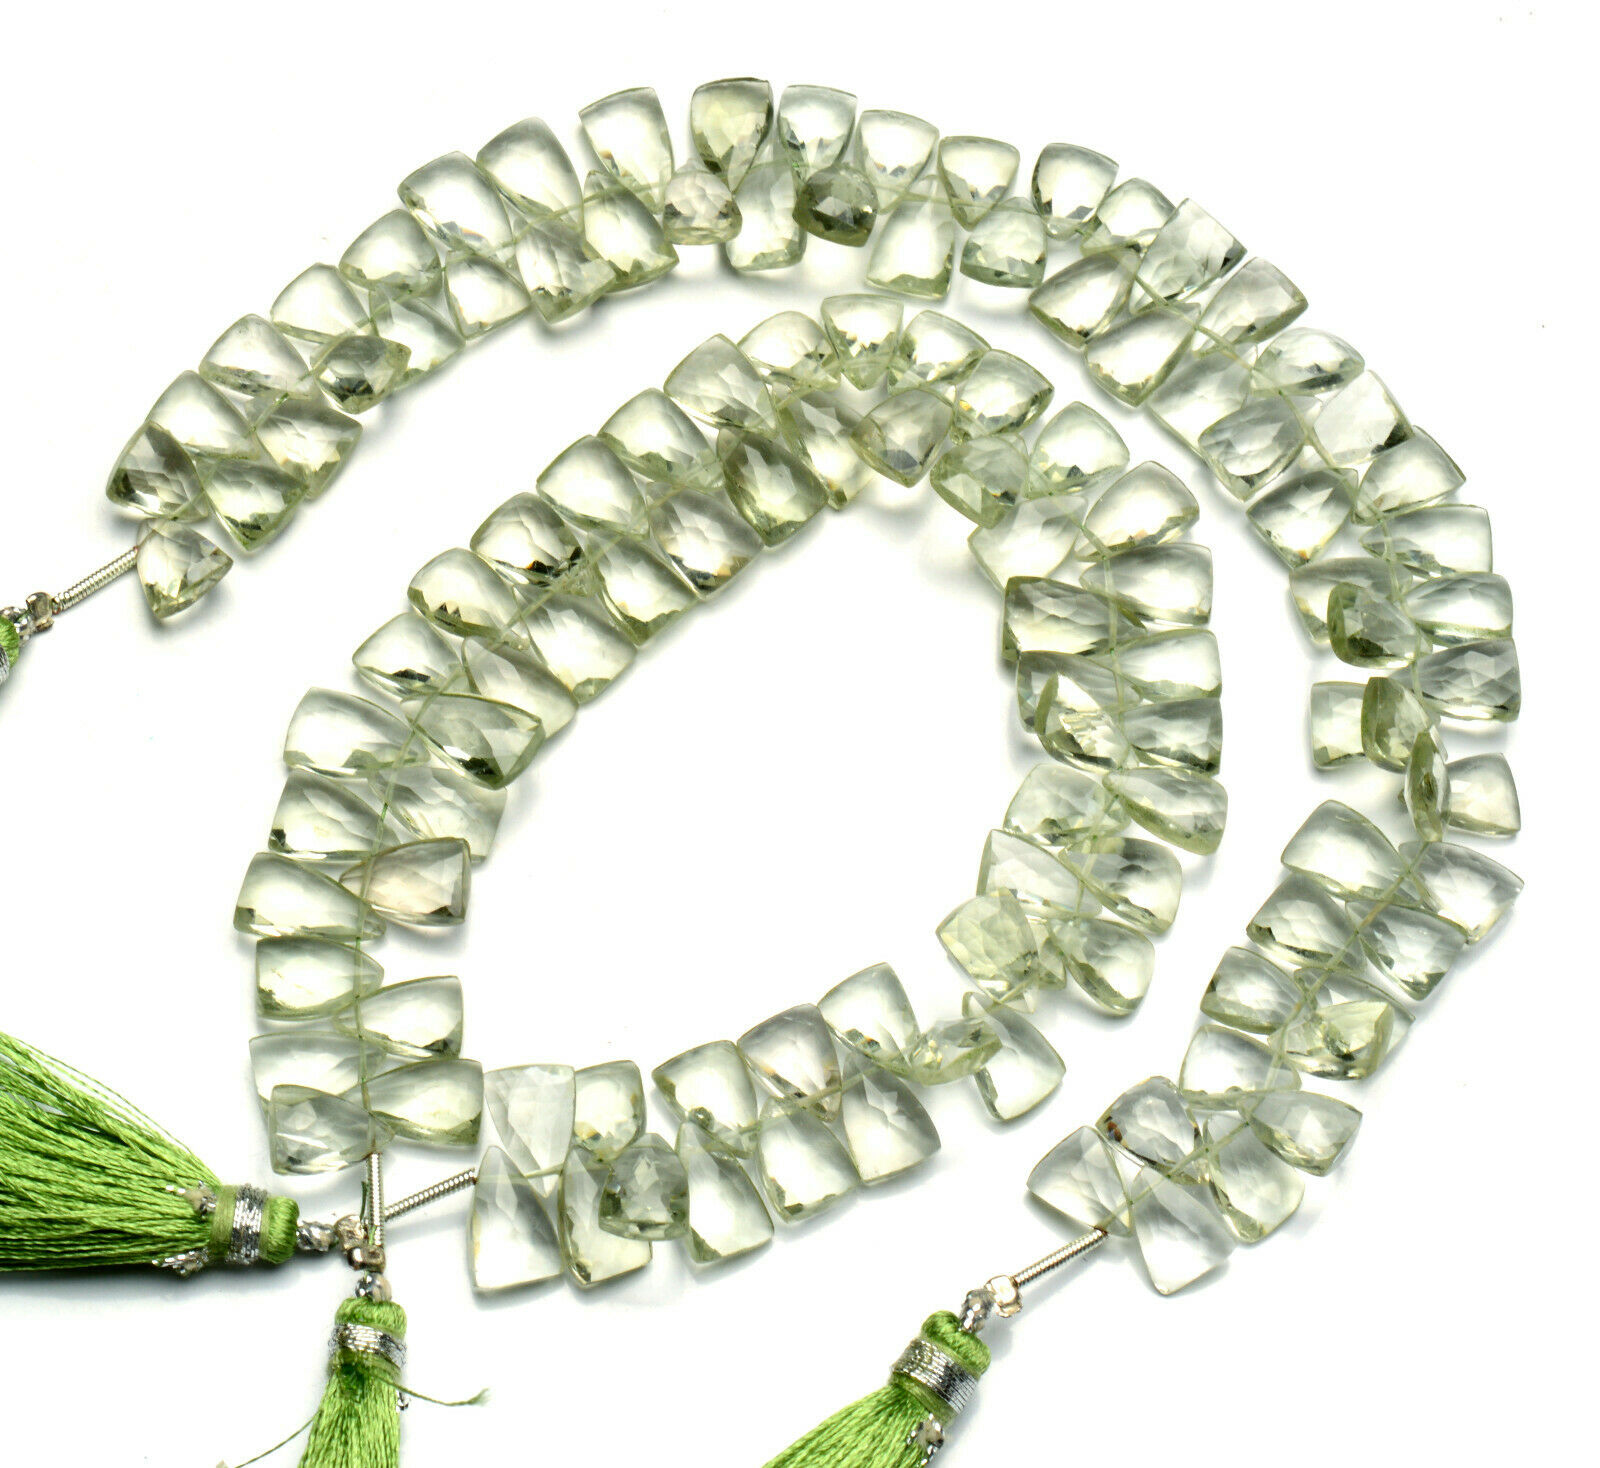 Natural Gem Green Amethyst Prasiolite 10x7mm Size Faceted Triangle Shape Beads9"